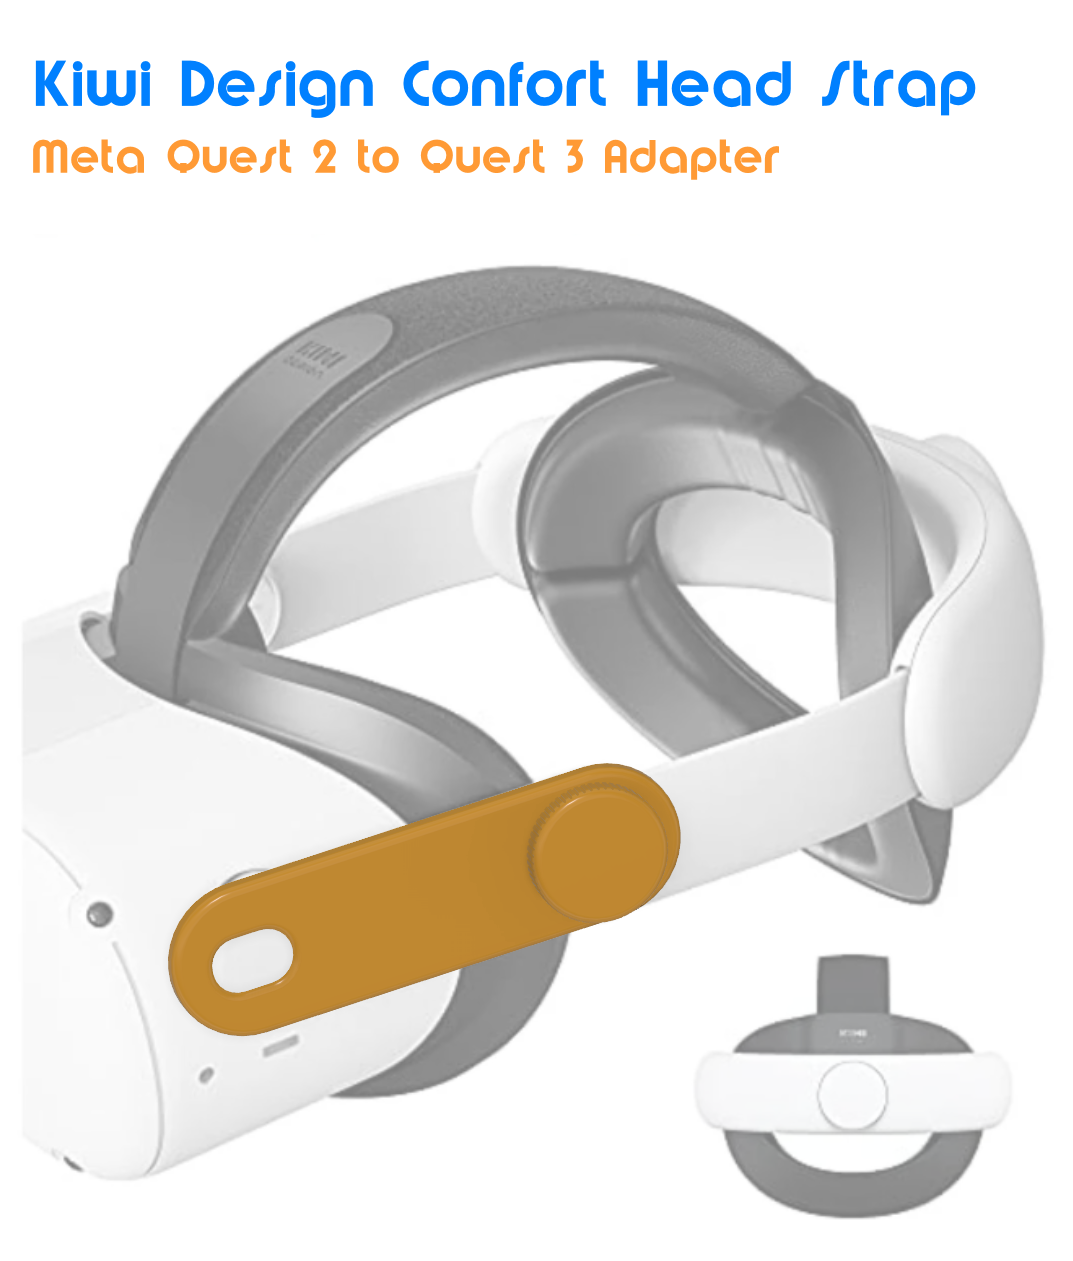 Kiwi Design Confort Head Strap Quest 2 to Quest 3 adapter by CBA3D